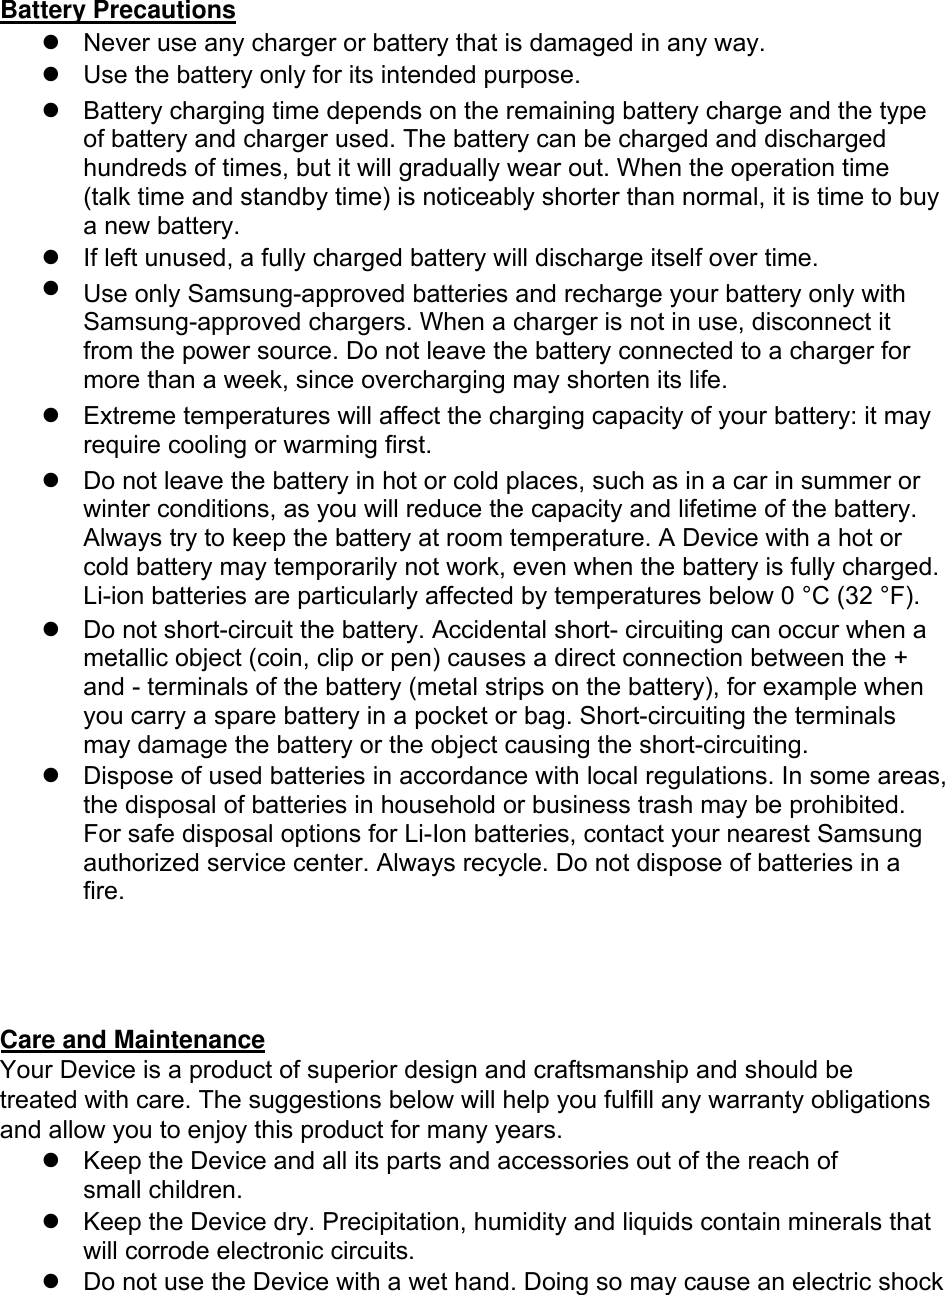 Battery Precautions Never use any charger or battery that is damaged in any way.Use the battery only for its intended purpose.Battery charging time depends on the remaining battery charge and the typeof battery and charger used. The battery can be charged and dischargedhundreds of times, but it will gradually wear out. When the operation time(talk time and standby time) is noticeably shorter than normal, it is time to buya new battery.If left unused, a fully charged battery will discharge itself over time.Use only Samsung-approved batteries and recharge your battery only withSamsung-approved chargers. When a charger is not in use, disconnect itfrom the power source. Do not leave the battery connected to a charger formore than a week, since overcharging may shorten its life.Extreme temperatures will affect the charging capacity of your battery: it mayrequire cooling or warming first.Do not leave the battery in hot or cold places, such as in a car in summer orwinter conditions, as you will reduce the capacity and lifetime of the battery.Always try to keep the battery at room temperature. A Device with a hot orcold battery may temporarily not work, even when the battery is fully charged.Li-ion batteries are particularly affected by temperatures below 0 °C (32 °F).Do not short-circuit the battery. Accidental short- circuiting can occur when ametallic object (coin, clip or pen) causes a direct connection between the +and - terminals of the battery (metal strips on the battery), for example whenyou carry a spare battery in a pocket or bag. Short-circuiting the terminalsmay damage the battery or the object causing the short-circuiting.Dispose of used batteries in accordance with local regulations. In some areas,the disposal of batteries in household or business trash may be prohibited.For safe disposal options for Li-Ion batteries, contact your nearest Samsungauthorized service center. Always recycle. Do not dispose of batteries in afire.Care and Maintenance Your Device is a product of superior design and craftsmanship and should be treated with care. The suggestions below will help you fulfill any warranty obligations and allow you to enjoy this product for many years. Keep the Device and all its parts and accessories out of the reach ofsmall children.Keep the Device dry. Precipitation, humidity and liquids contain minerals thatwill corrode electronic circuits.Do not use the Device with a wet hand. Doing so may cause an electric shock